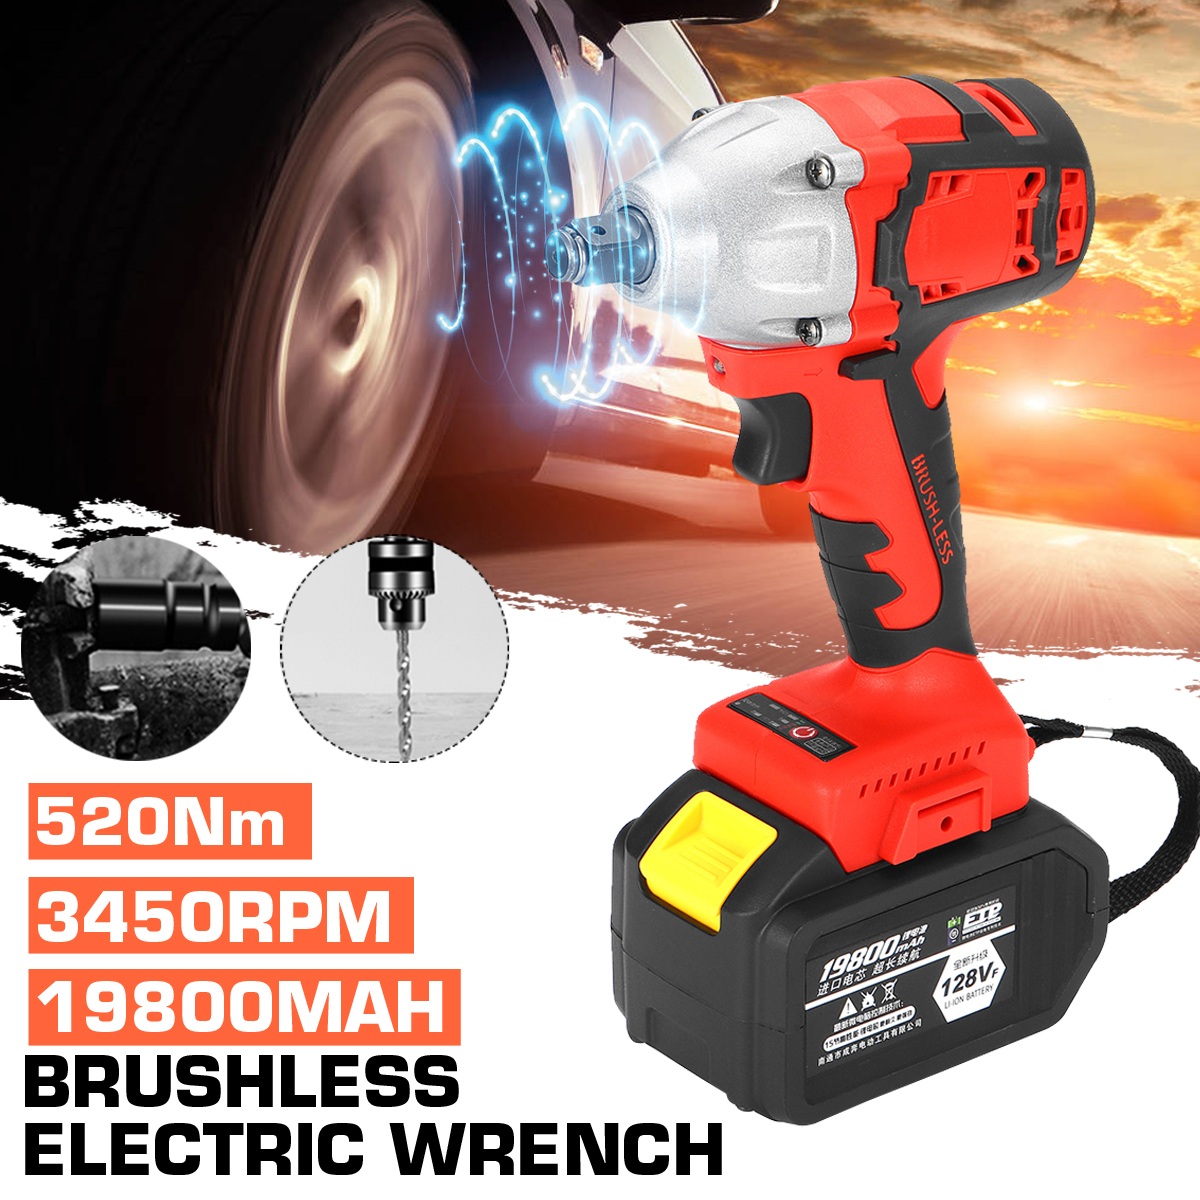 128VF-19800mah-Electric-Impact-Wrench-Brushless-Cordless-Drill-Tool-With-Battery-1685512-1